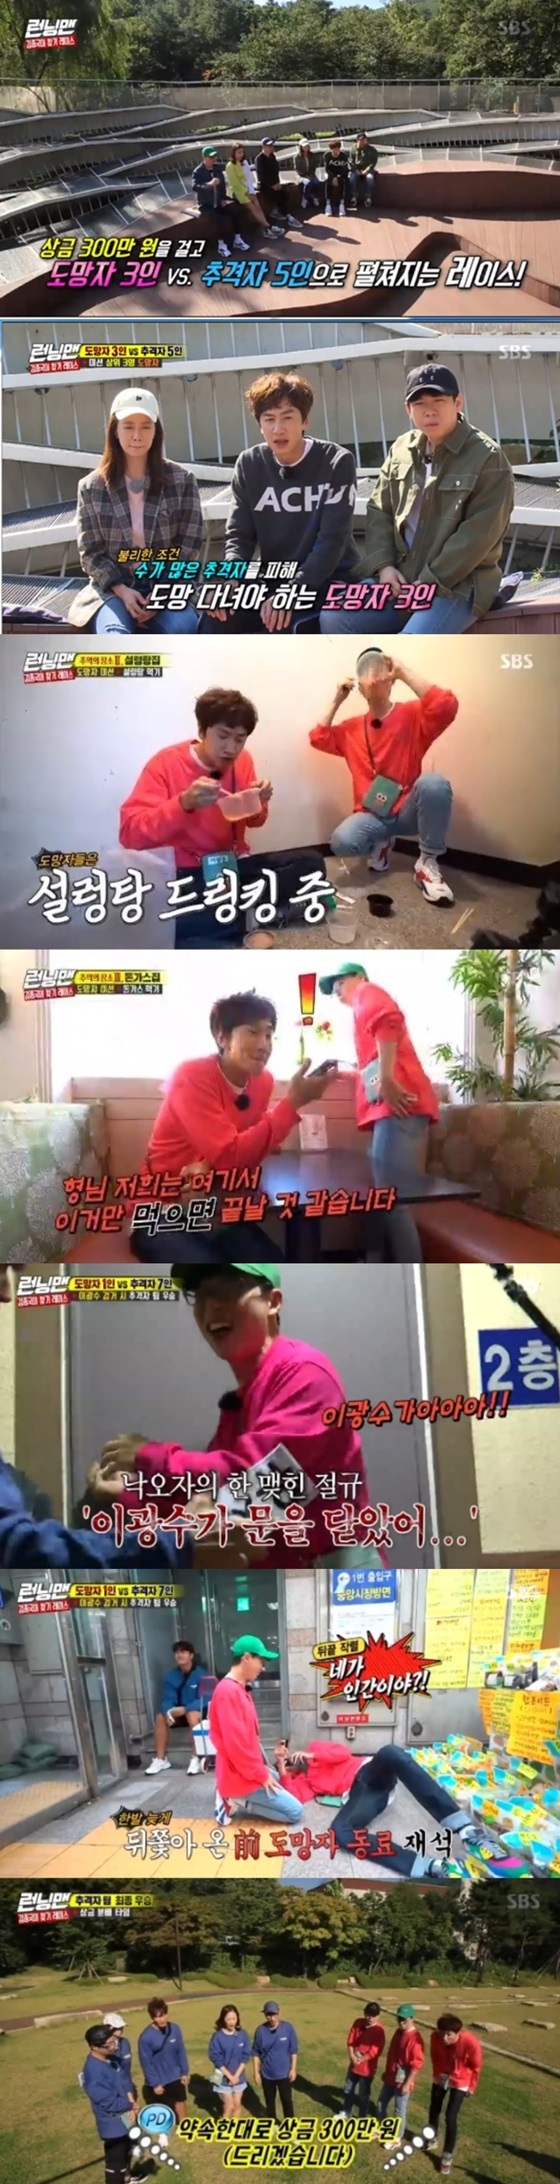 Lee Kwang-soo, who was caught by Kim Jong-kook in SBS entertainment program Running Man, became the best one minute.According to Nielsen Korea, a TV viewer rating research institute on the 14th, Running Man, which was broadcast on the 13th, recorded 3.6% of 2049 target TV viewer ratings, which is an important indicator of major advertising officials, higher than the previous week (based on the second part of the metropolitan area).Per minute Top TV viewer ratings soared to 7.5 percent, survey findsThe broadcast was interesting with a chase at Kim Jong-kooks home ground Anyang.Lee Kwang-soo, Yoo Jae-Suk, and Yang Se-chan, who were selected as fugitives, had to escape the Chaser team and succeed in missioning at three places where Kim Jong-kooks memories were recorded. The pursuit team was able to win a prize money of 3 million won if Kim Jong-kook was arrested.The fugitive team succeeded in signing 110 signs at the mall like the first mission Kim Jong-kook, but the second mission site, Kim Jong-kook, was caught by Yang Se-chan at the regular Seollungtang restaurant.Yoo Jae-Suk and Lee Kwang-soo fled while The Chaser team was focused on Yang Se-chan, and chose the Dongas House on Anyang 1st Street as the last mission site.However, Yoo Jae-Suk and Lee Kwang-soo, who met The Chaser team at the Dongas House, fled back to the back gate, and Lee Kwang-soo betrayed Yoo Jae-Suk and fled back to the front gate.Lee Kwang-soo fled to Anyang underground shopping mall, but was caught by Kim Jong-kook just before the mission success.The scene took the best minute with Per minute top TV viewer ratings of 7.5 per cent.Kim Jong-kook shared a prize money of 1 million won alongside Haha and Song Ji-hyo, who have never betrayed.